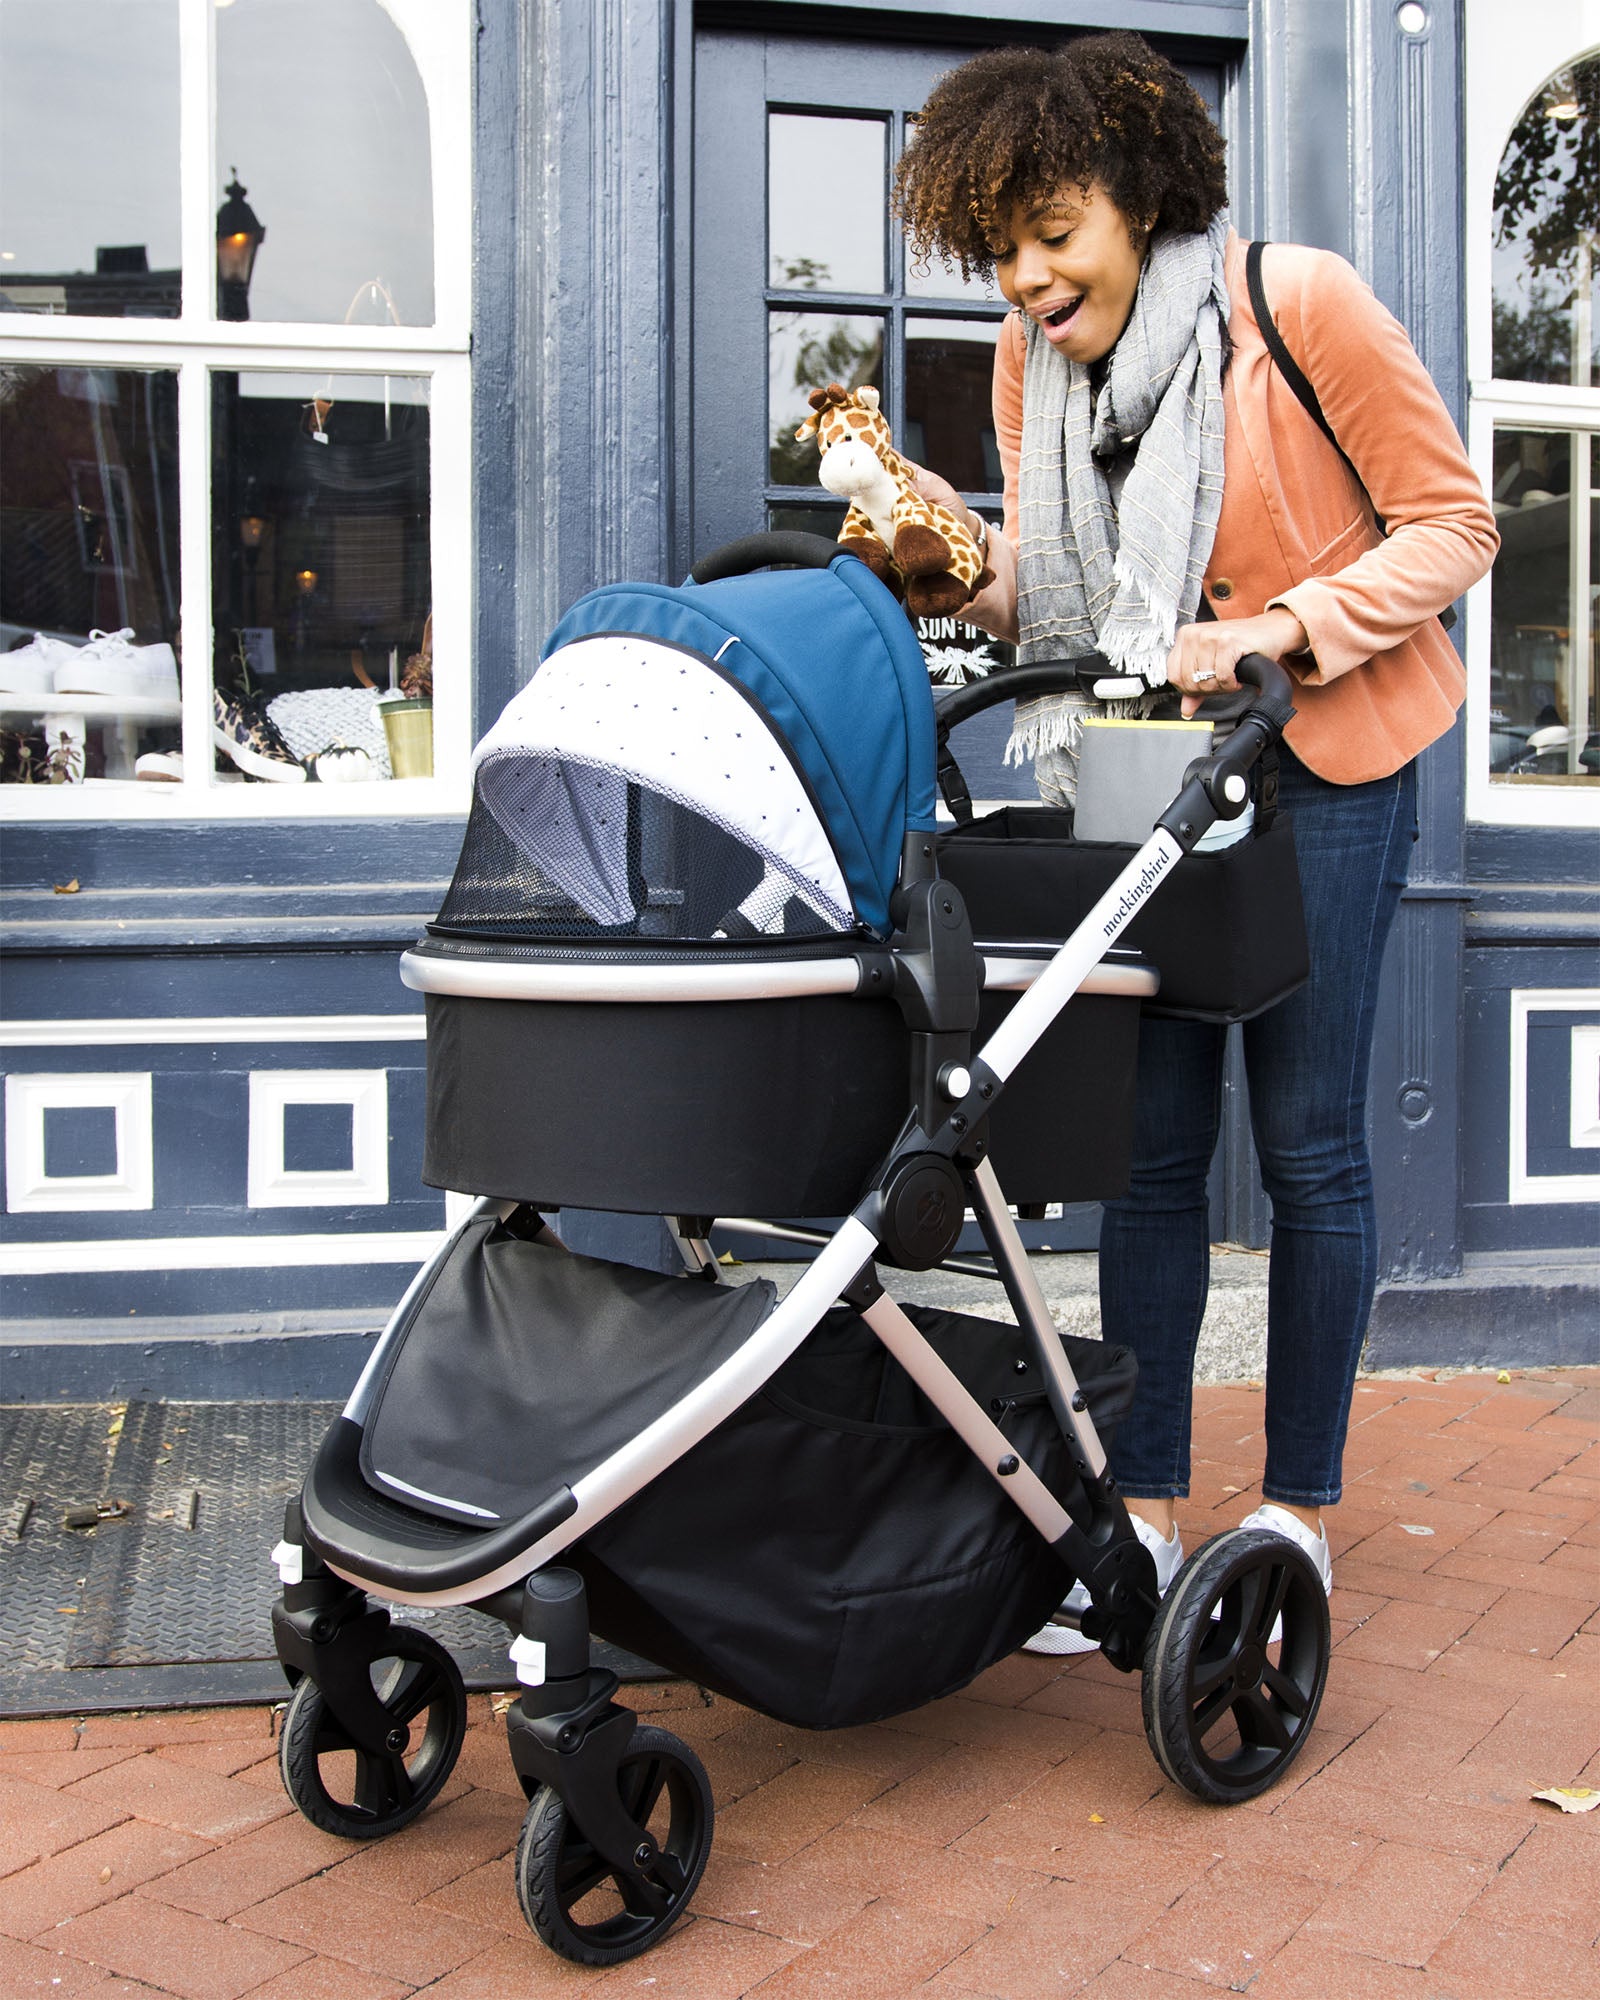 A woman smiling at a baby in a mockingbird-prod Stroller outside a shop, holding a toy giraffe.